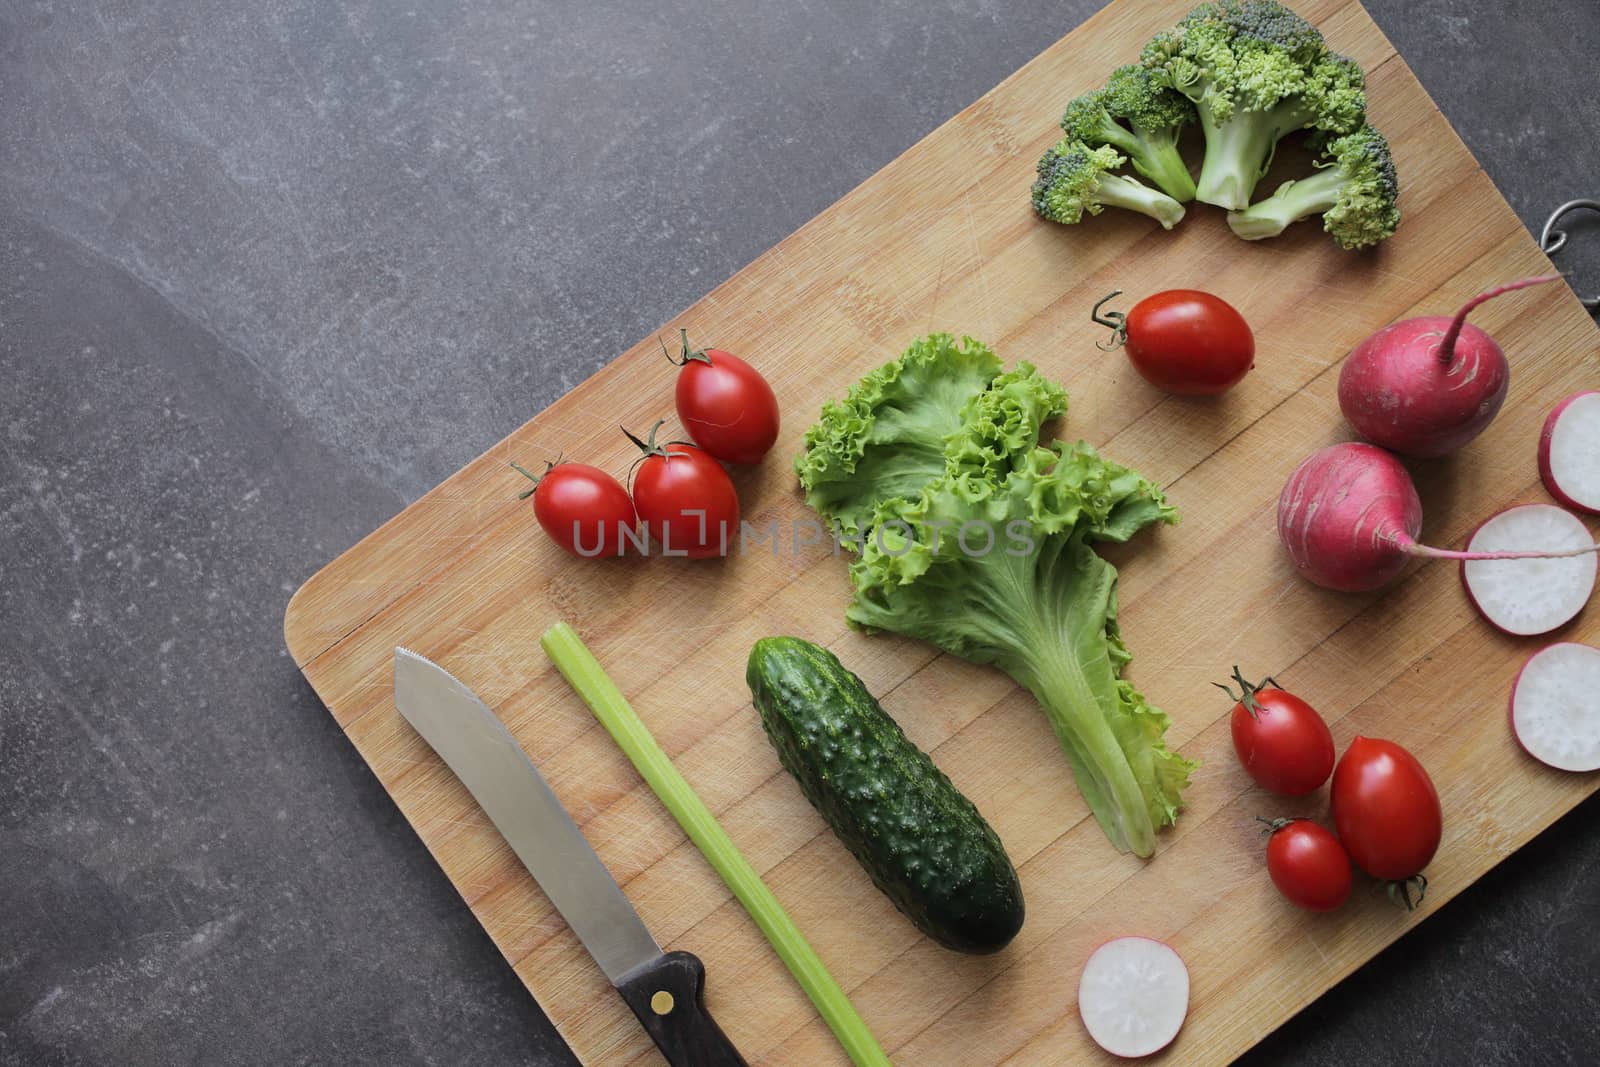 Fresh vegetables on a cutting board on a gray table Tomatoes, lettuce, broccoli, radish